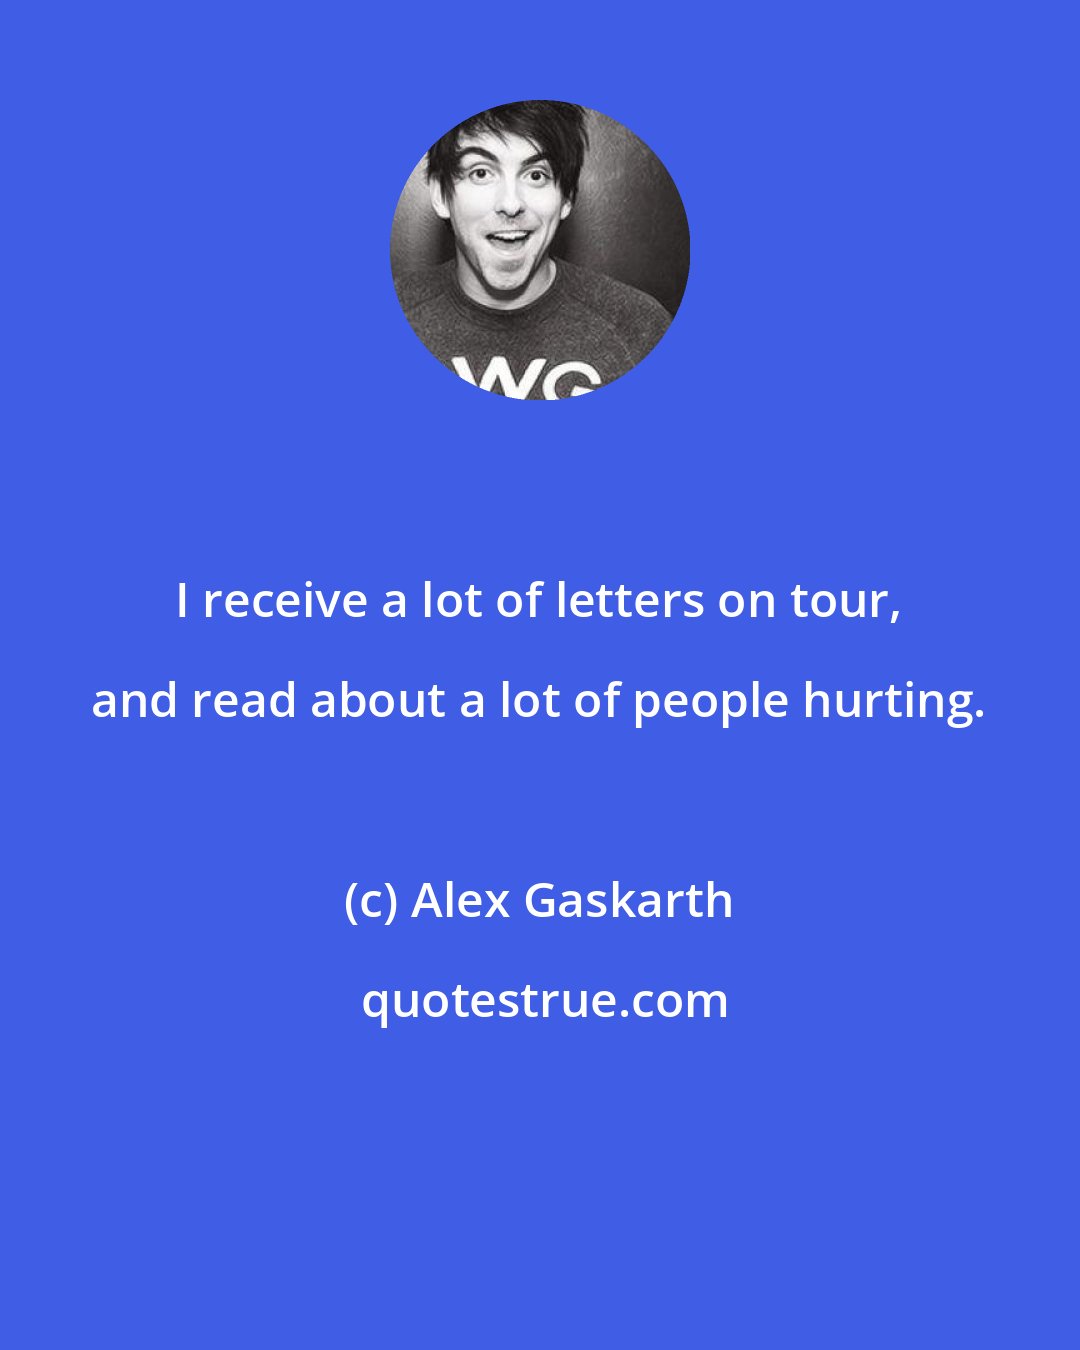 Alex Gaskarth: I receive a lot of letters on tour, and read about a lot of people hurting.